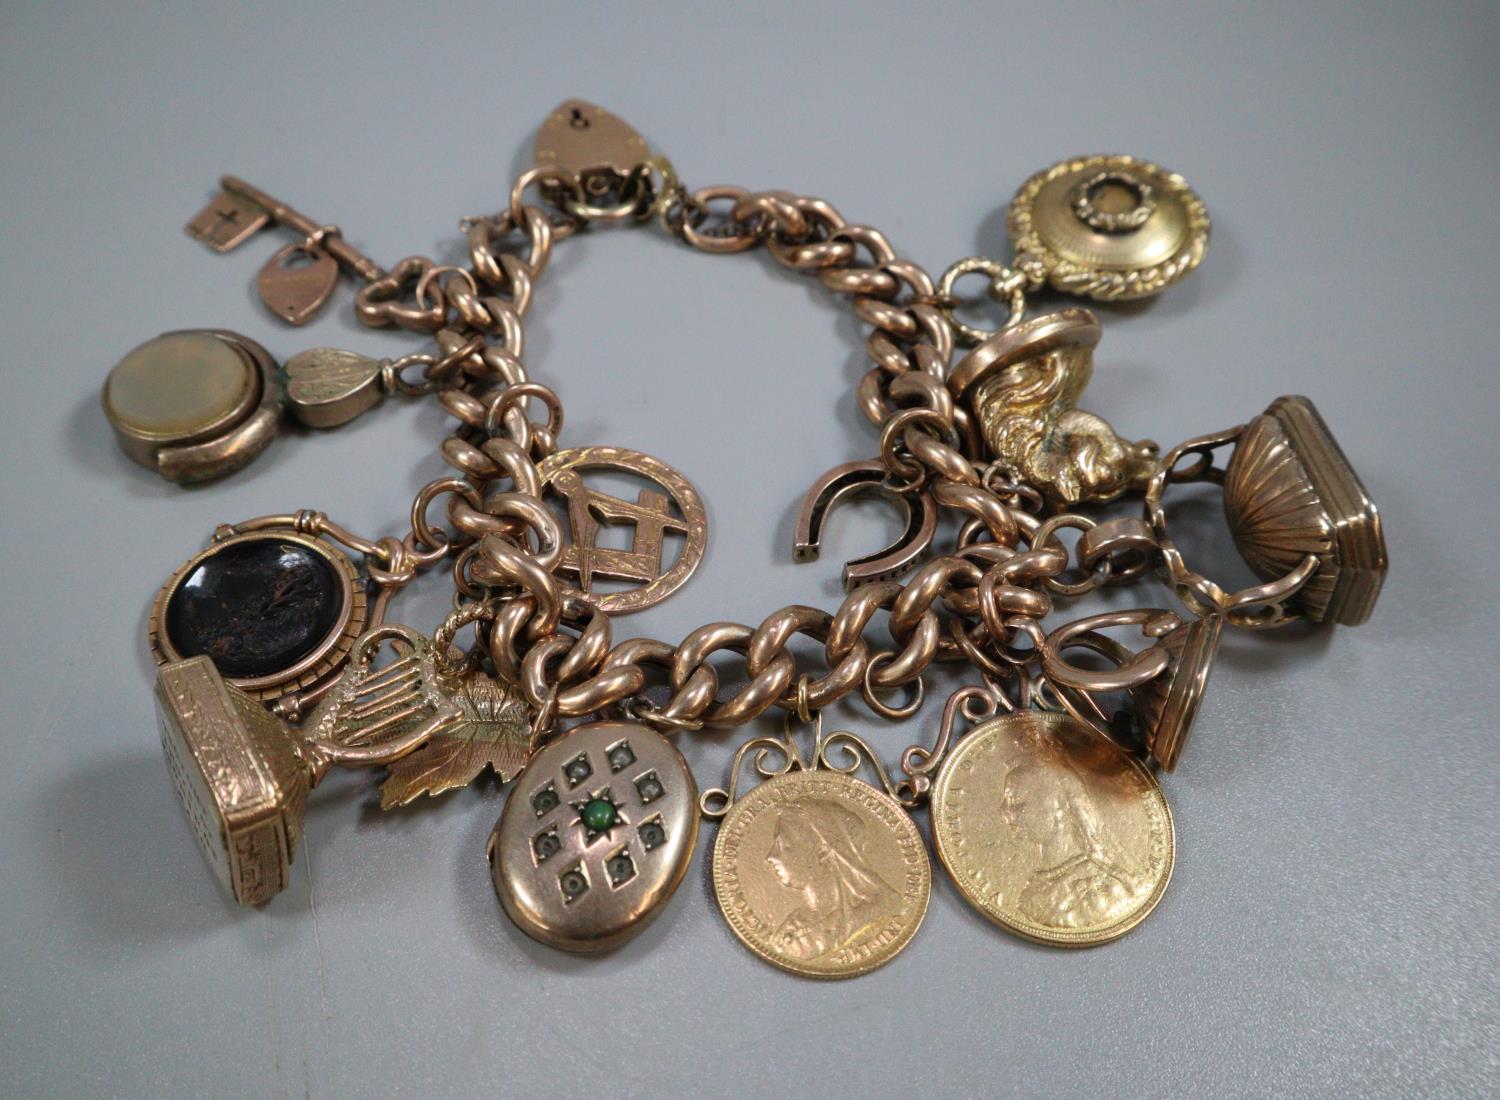 9ct gold curb link charm bracelet with assorted charms including: Masonic, harp, Intaglio seal - Image 2 of 4